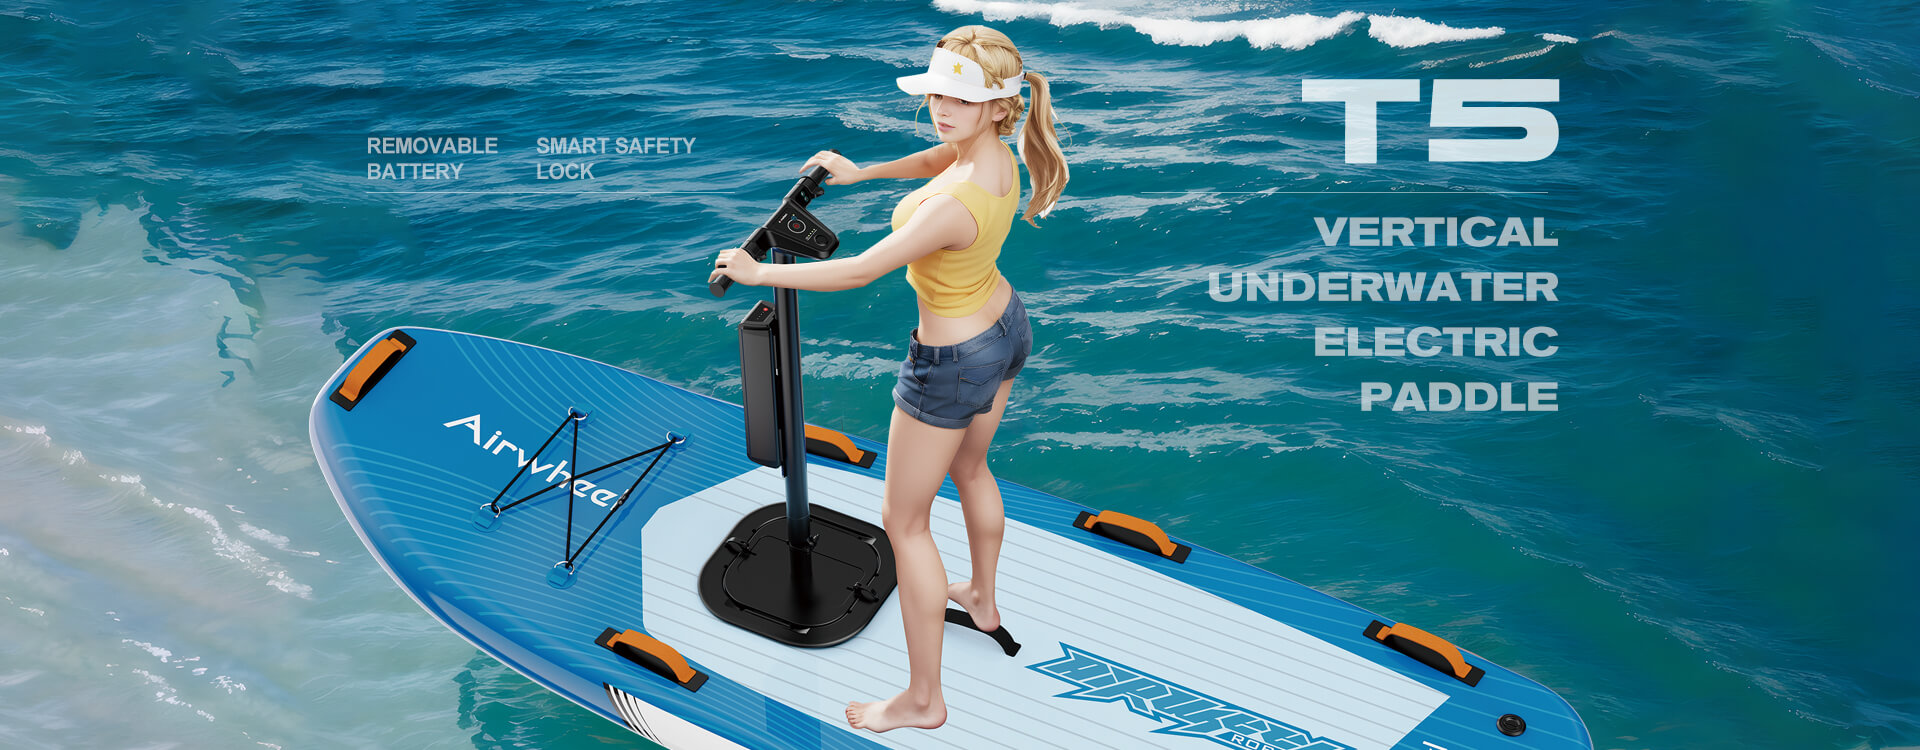 Airwheel T5 inflatable SUP board